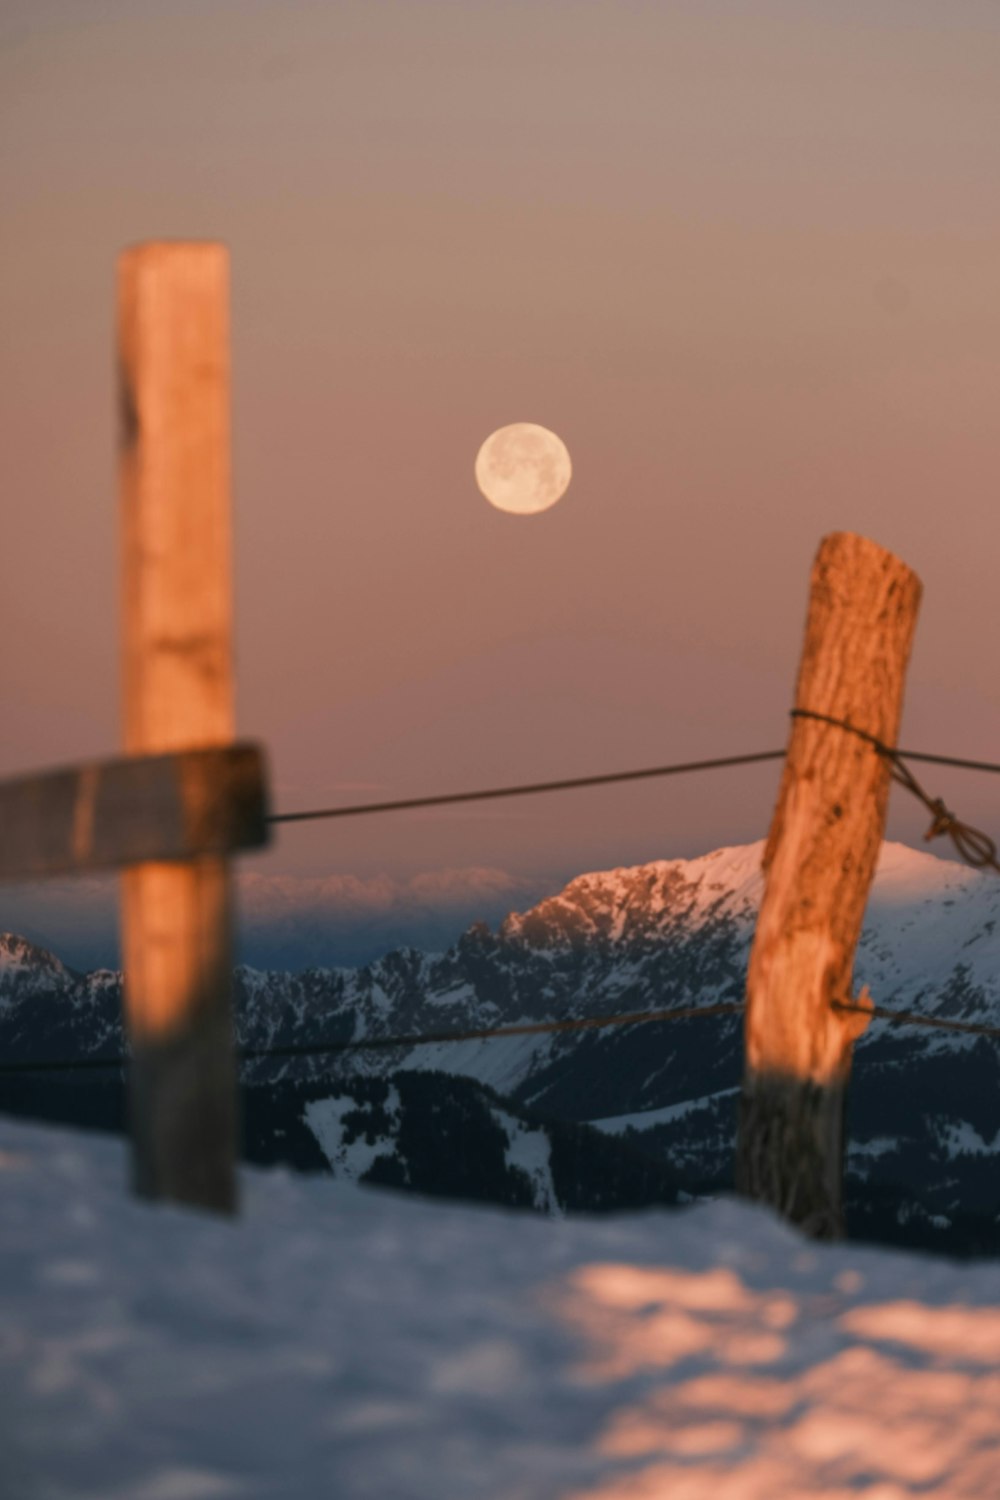 the moon is setting over a snowy mountain range